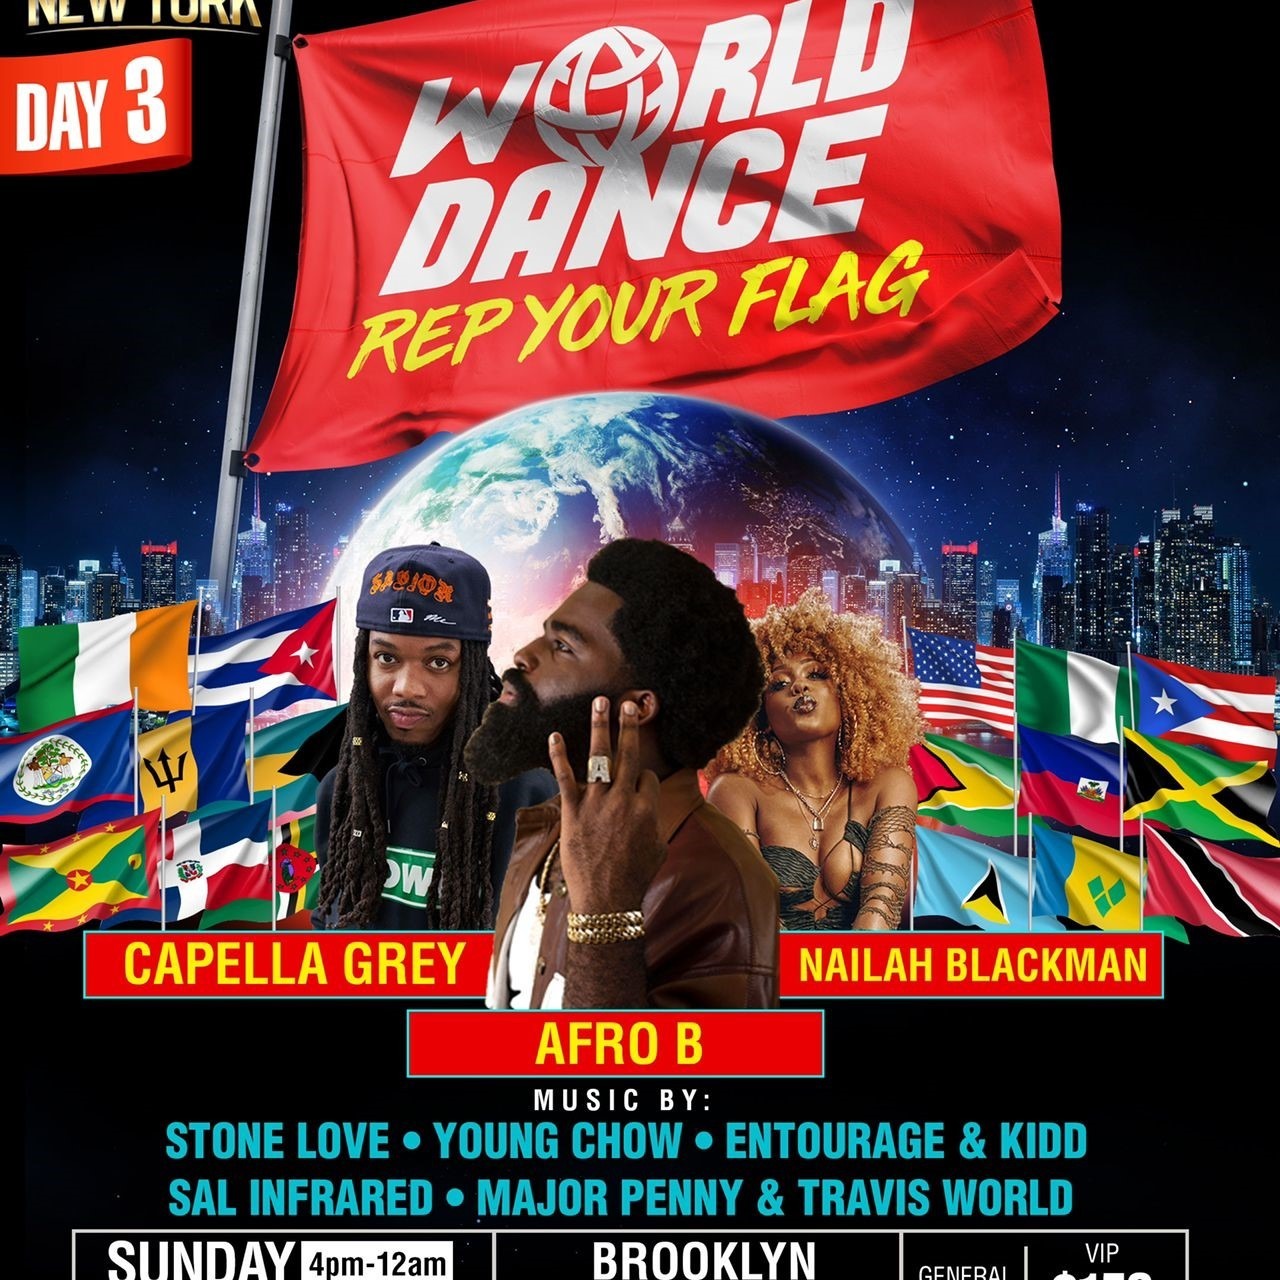 Dream Weekend NY World Dance Rep Your Flag Ft Capella Grey Afro B 